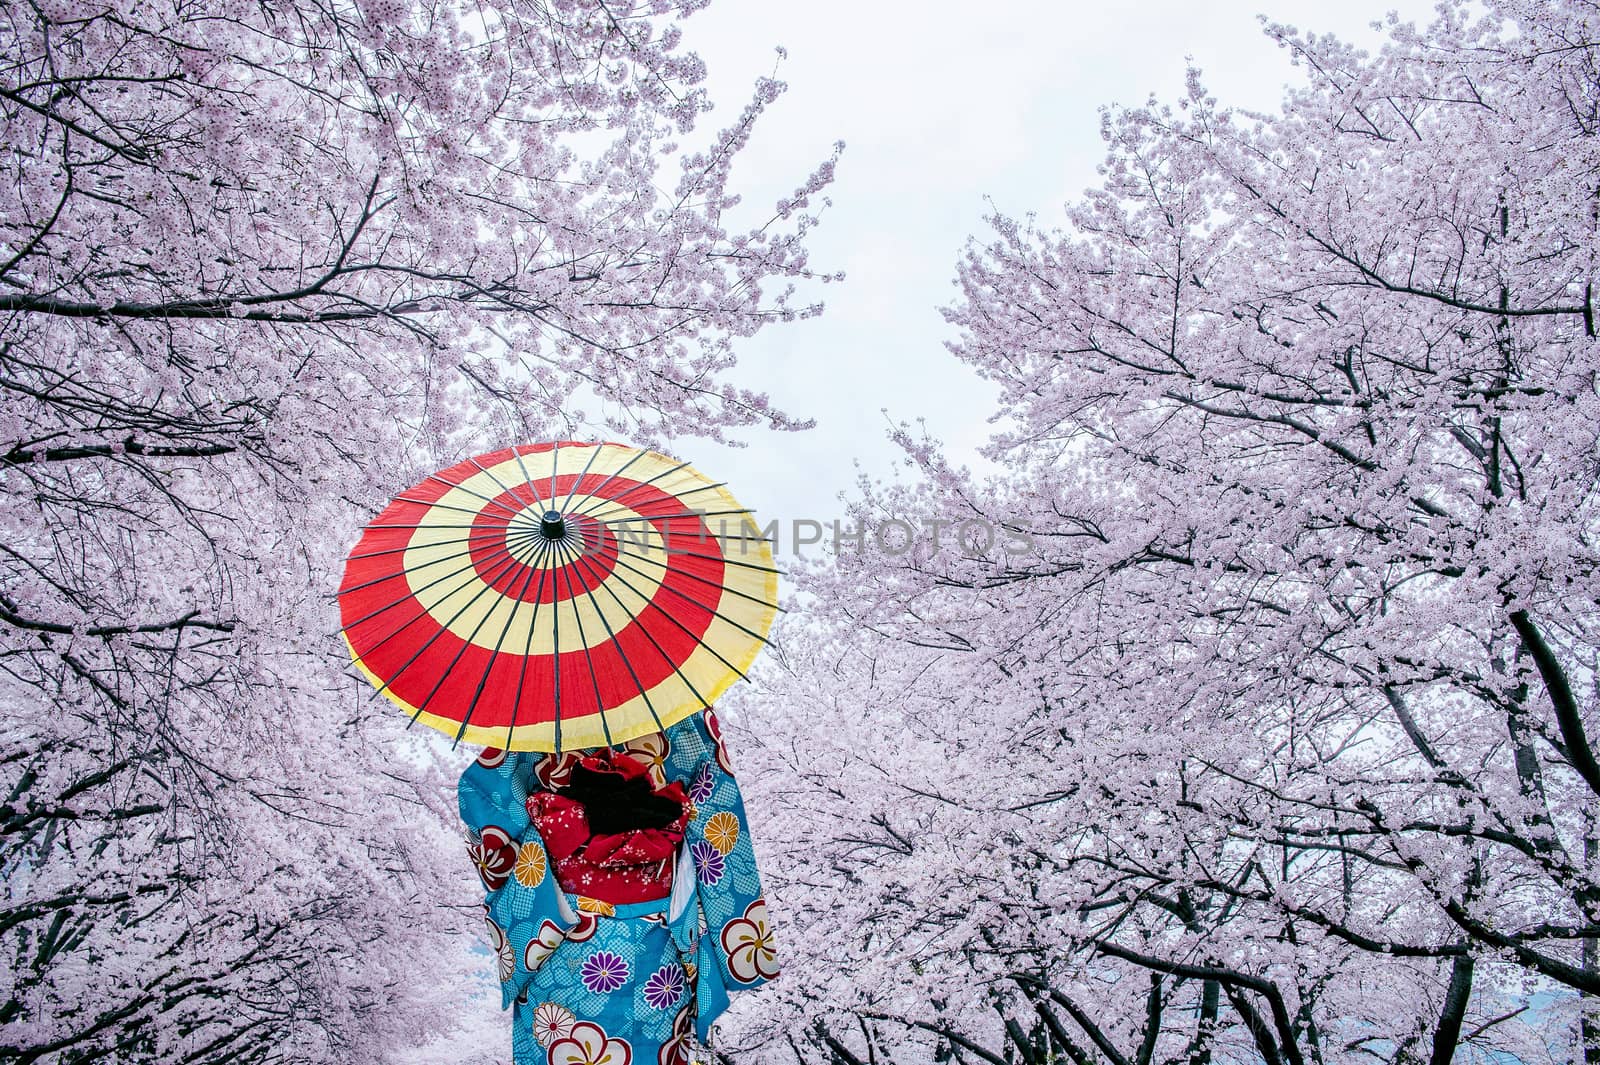 Asian woman wearing japanese traditional kimono and cherry blossom in spring, Japan. by gutarphotoghaphy